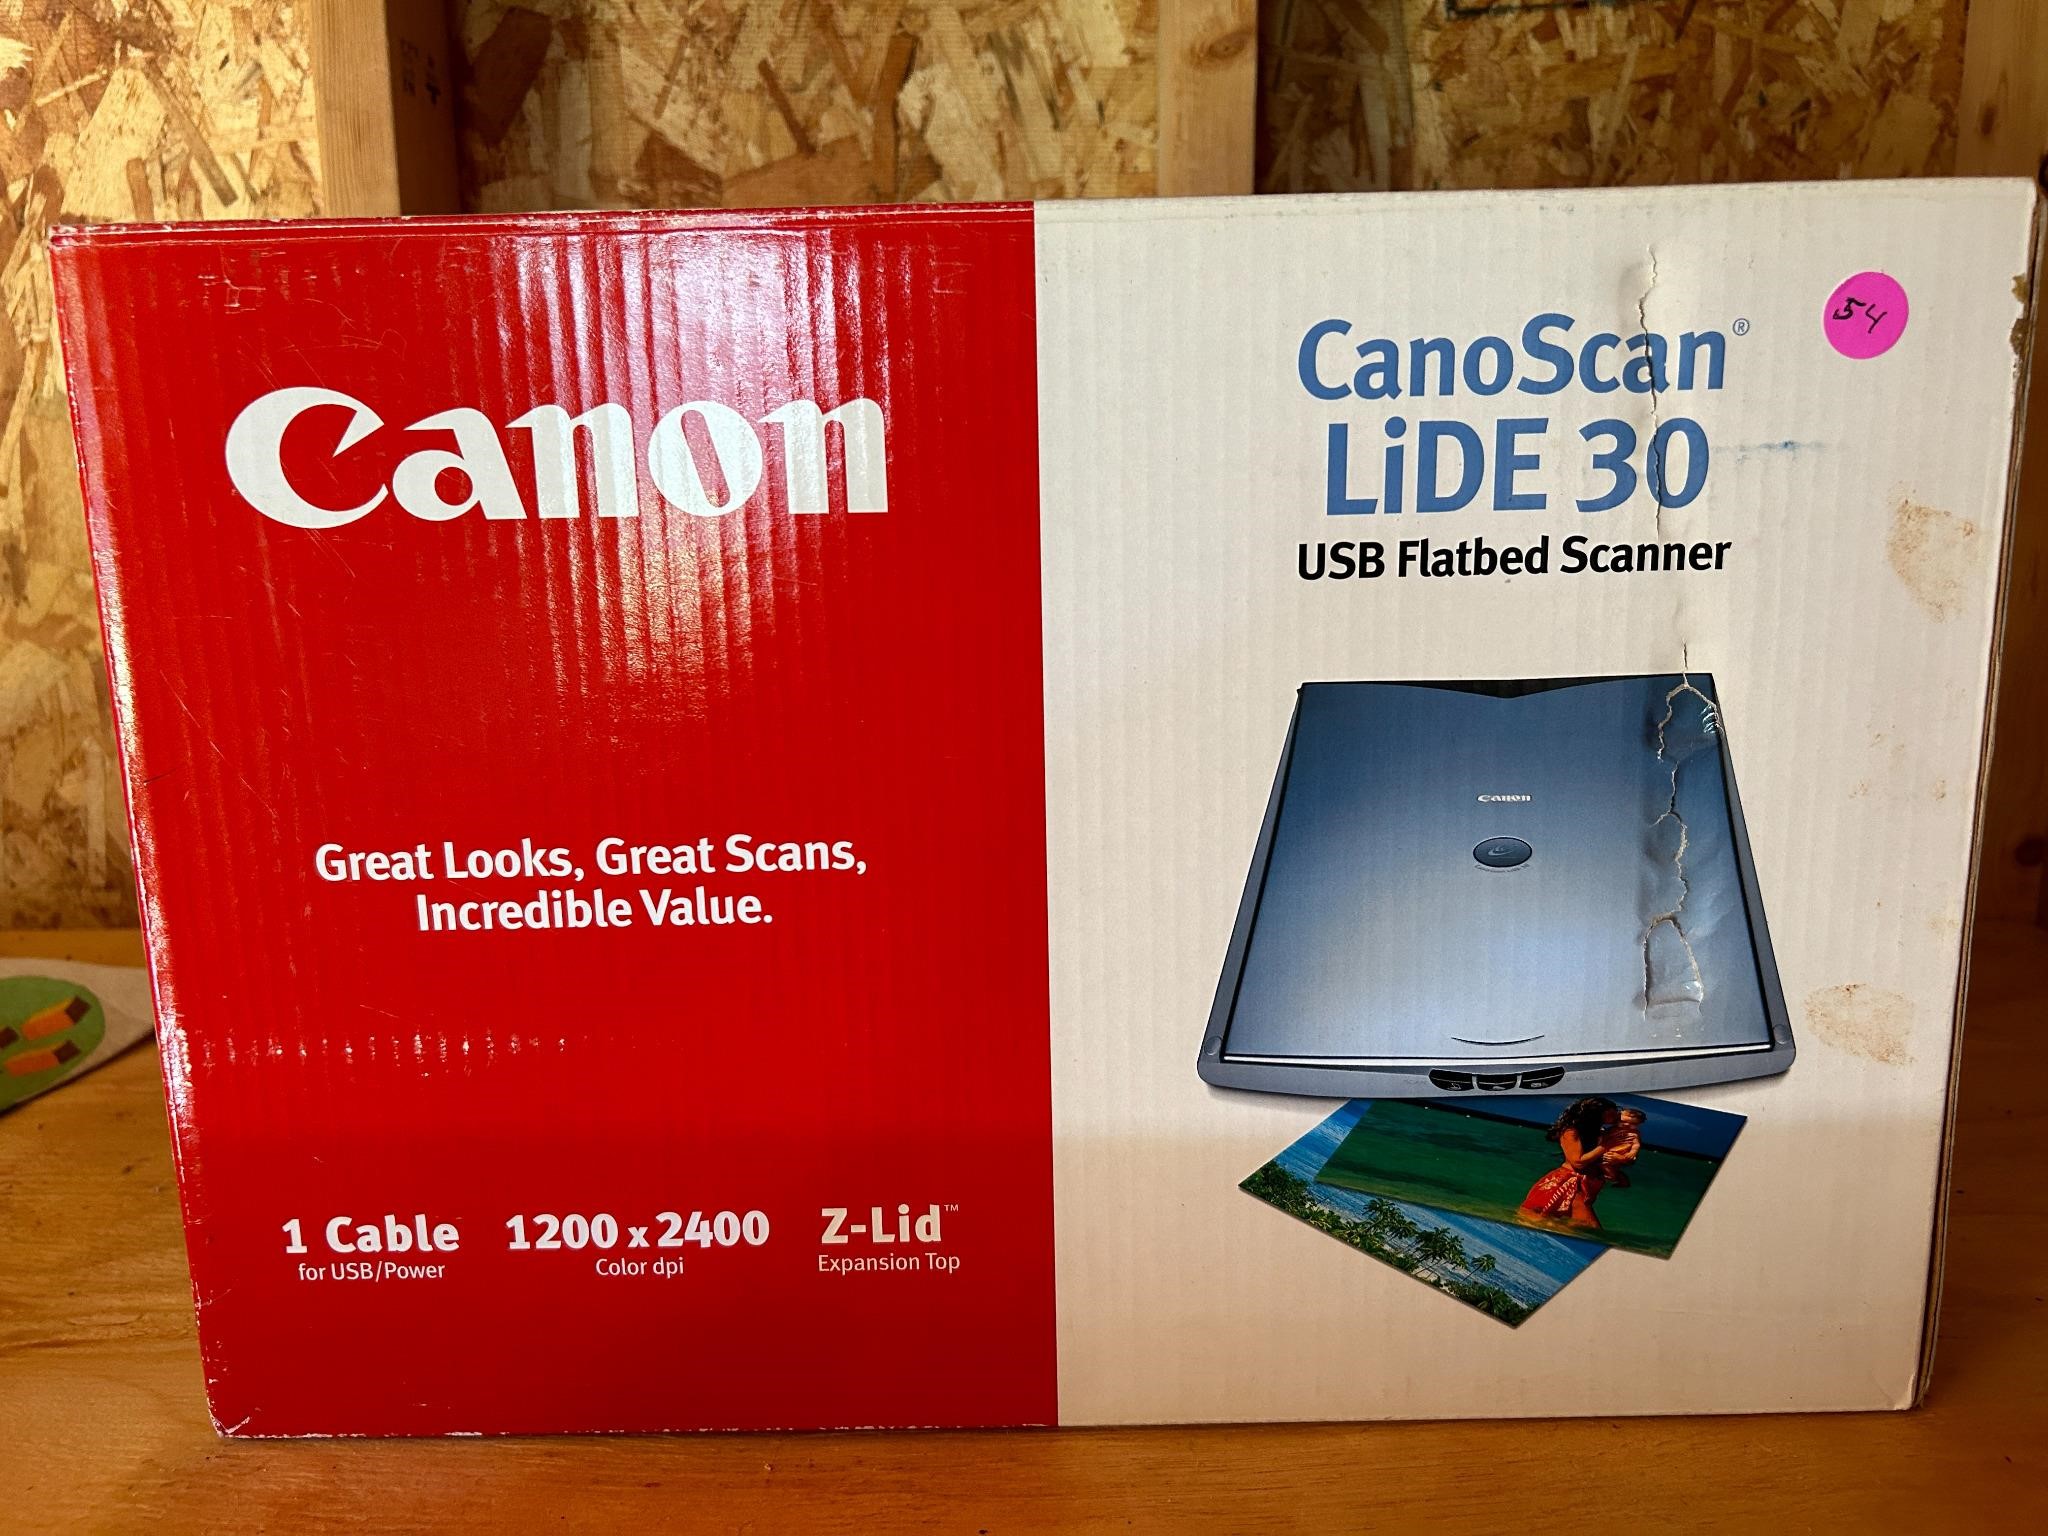 Canon USB Flatbed Scanner